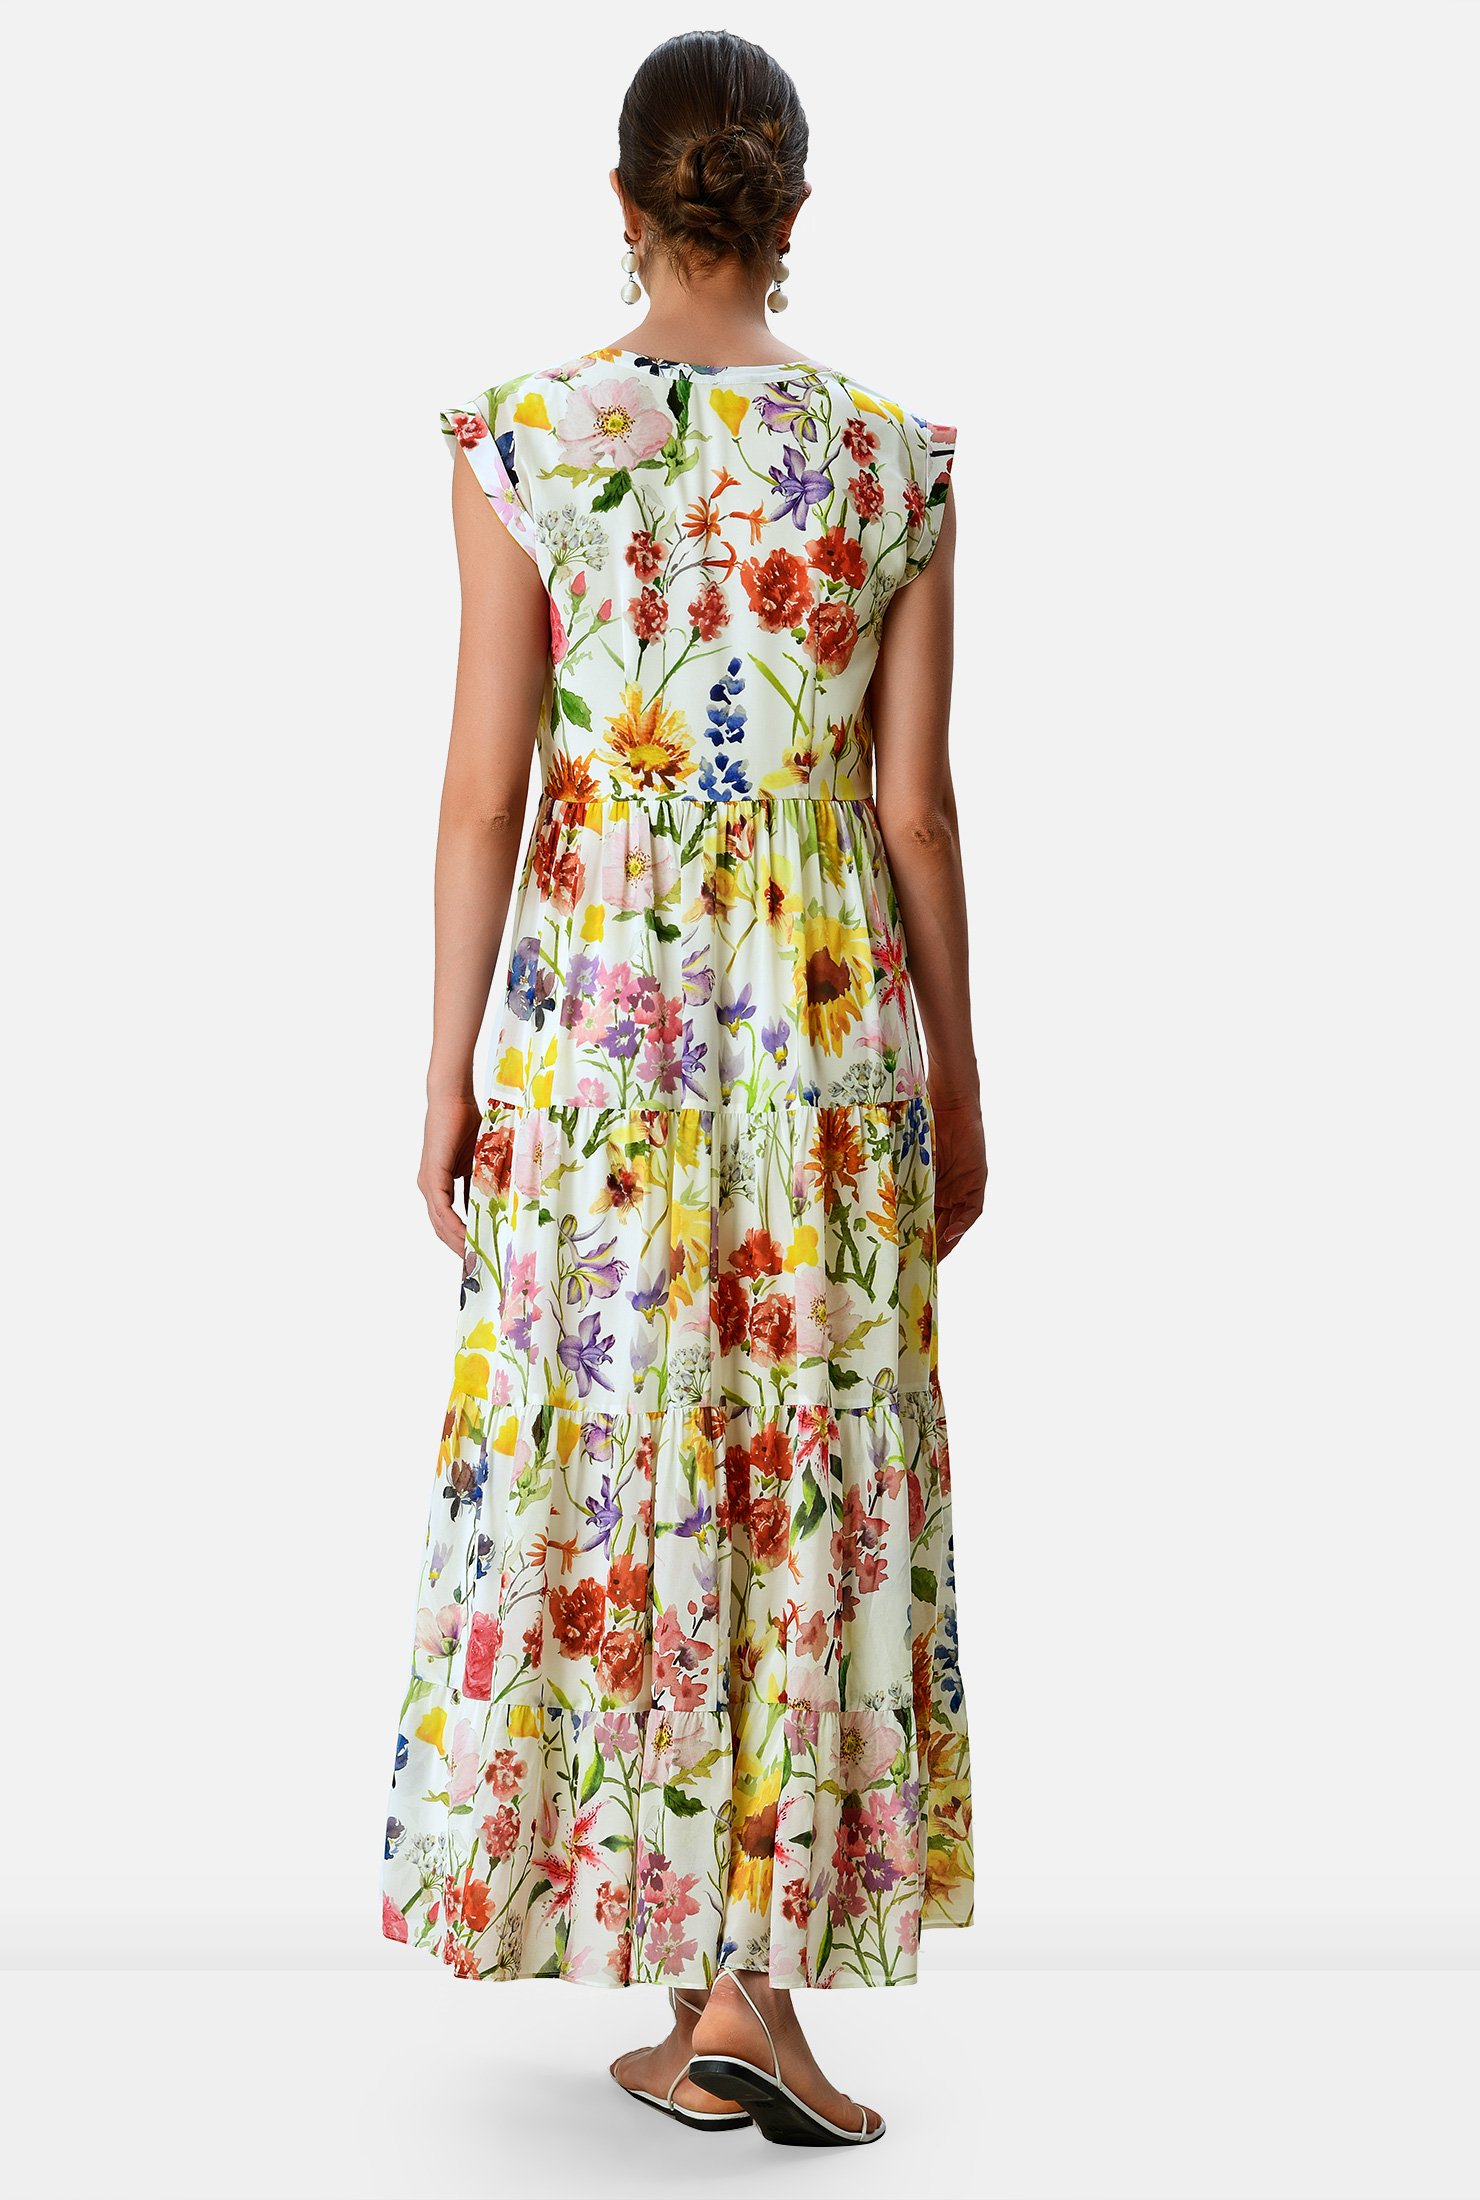 Herlipto Watercolor Floral Tiered Dress | nate-hospital.com